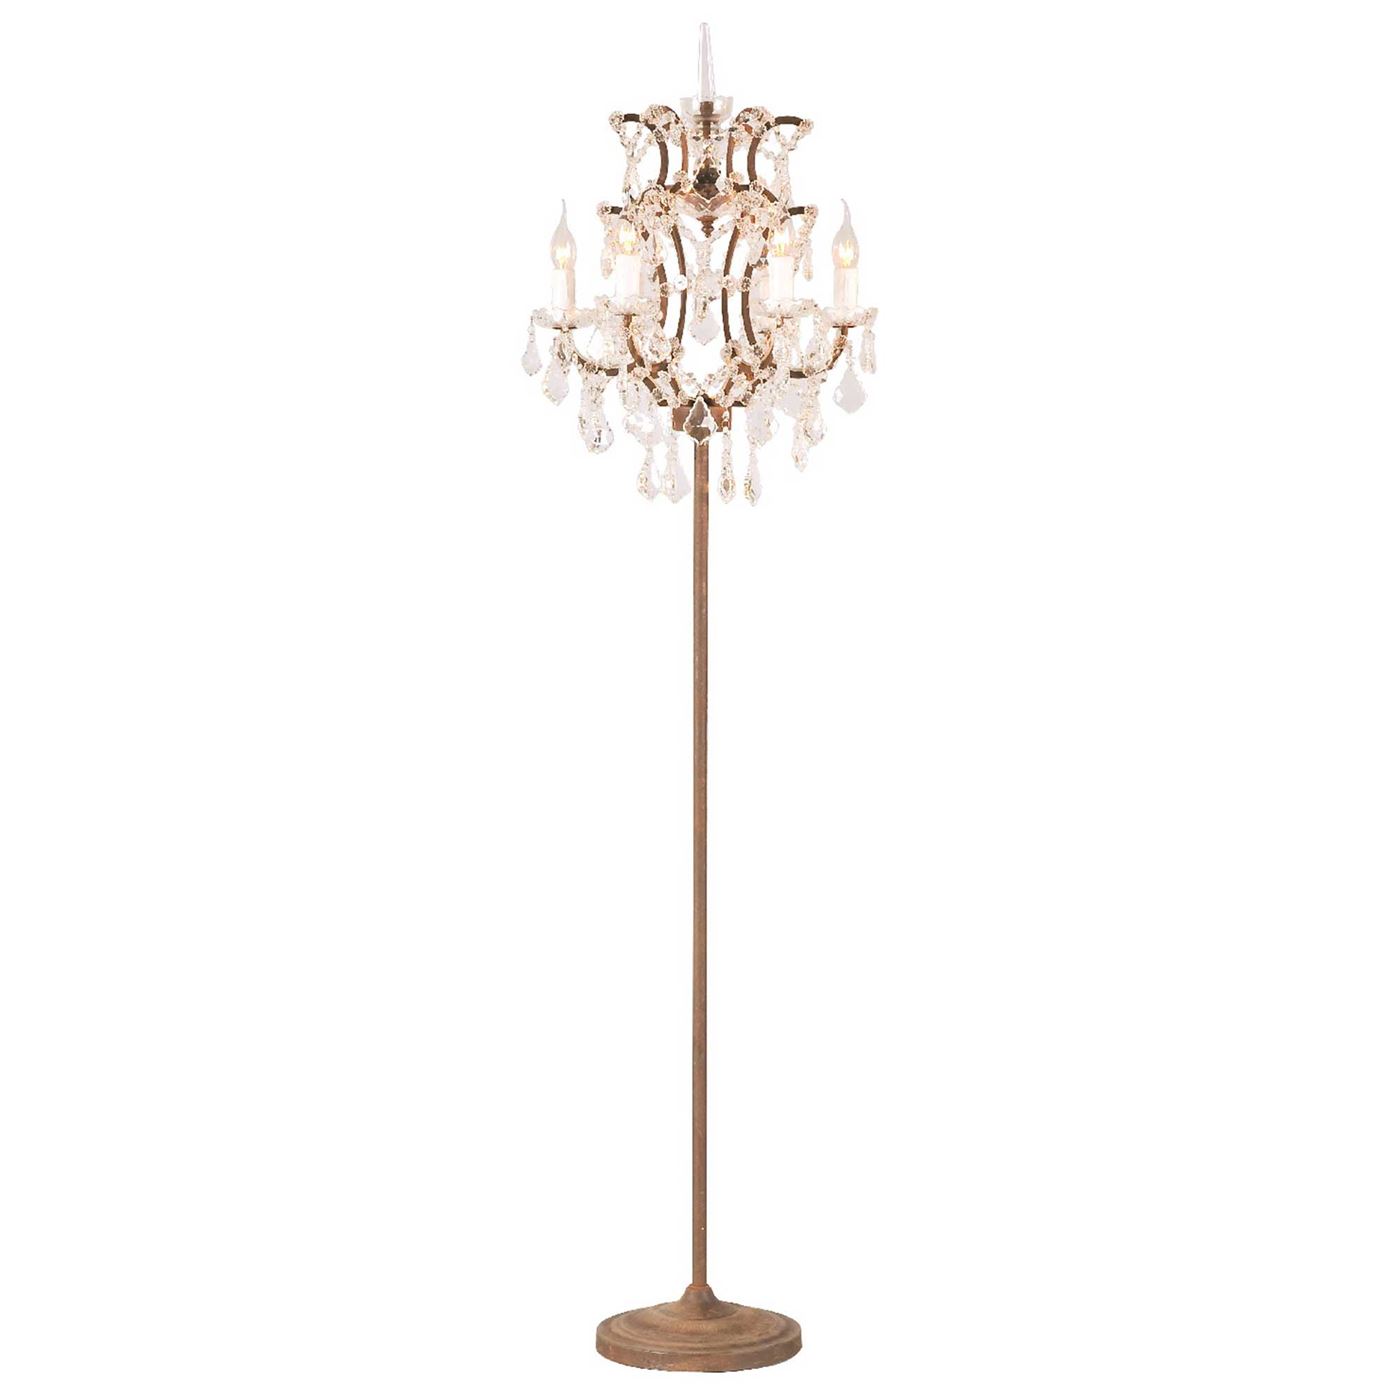 Photo of Timothy oulton crystal floor lamp in brown